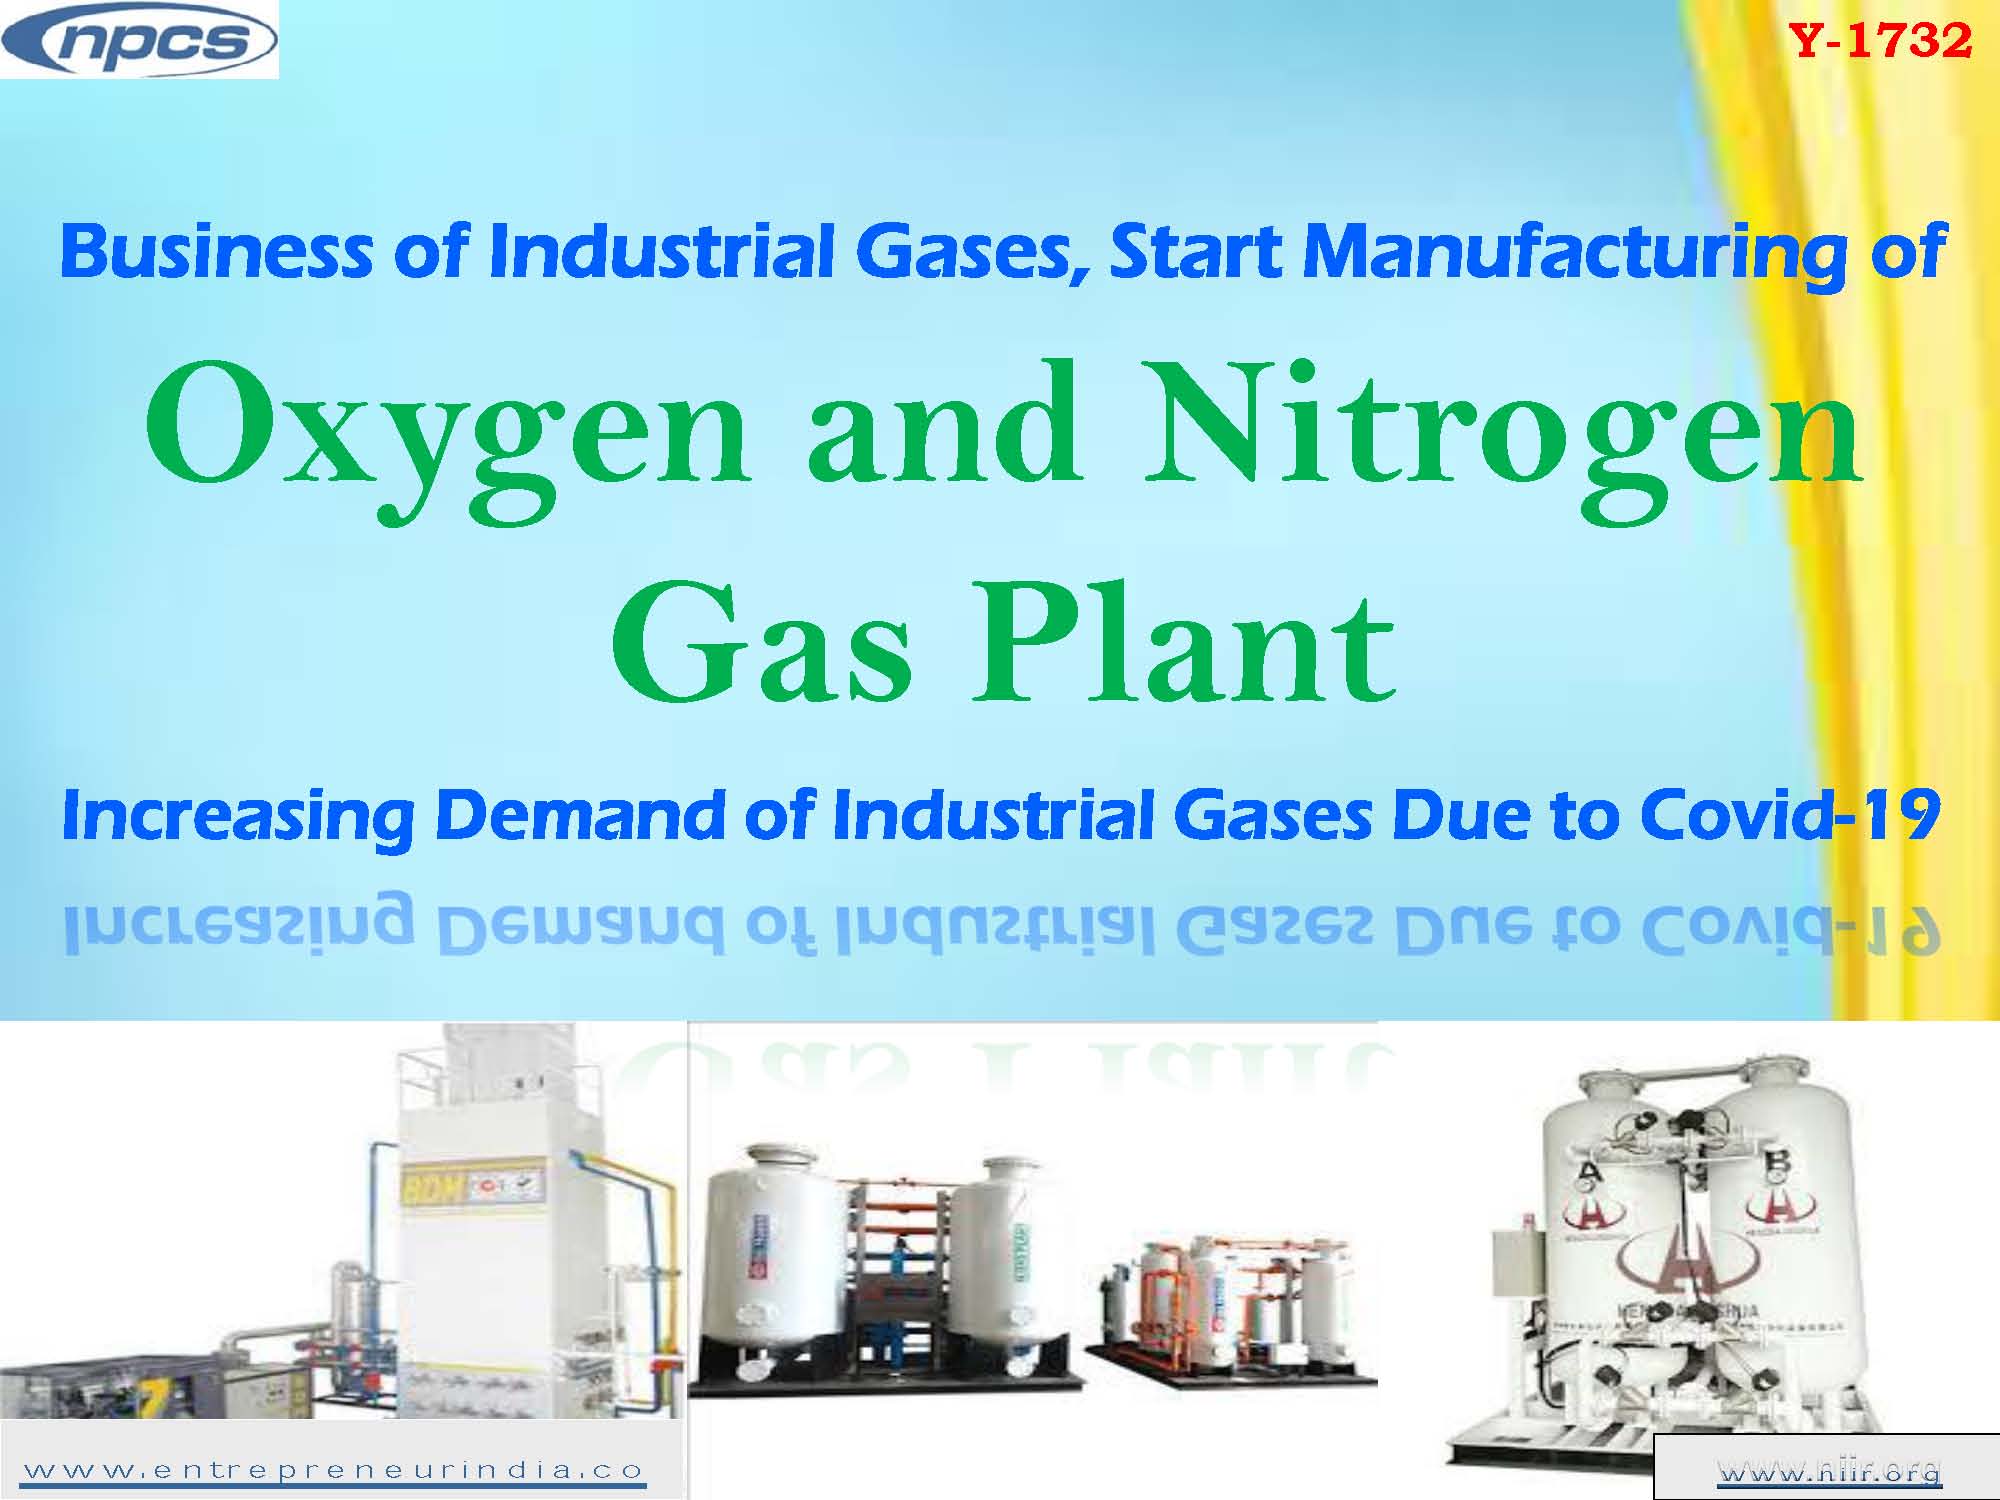 Business of Industrial Gases, Start Manufacturing of Oxygen and Nitrogen Gas Plant Increasing Demand of Industrial Gases Due to Covid-19